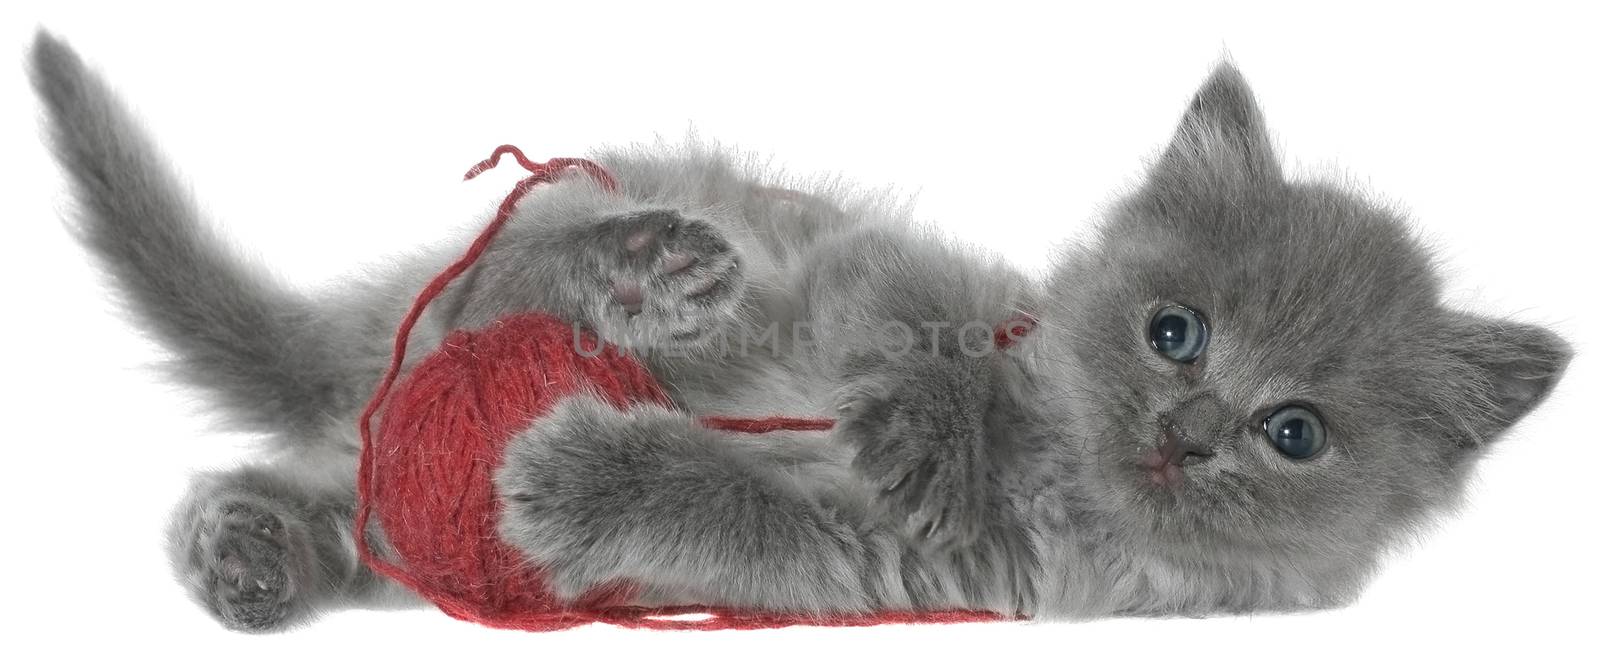 Small kitten playing with a ball of yarn on white background.